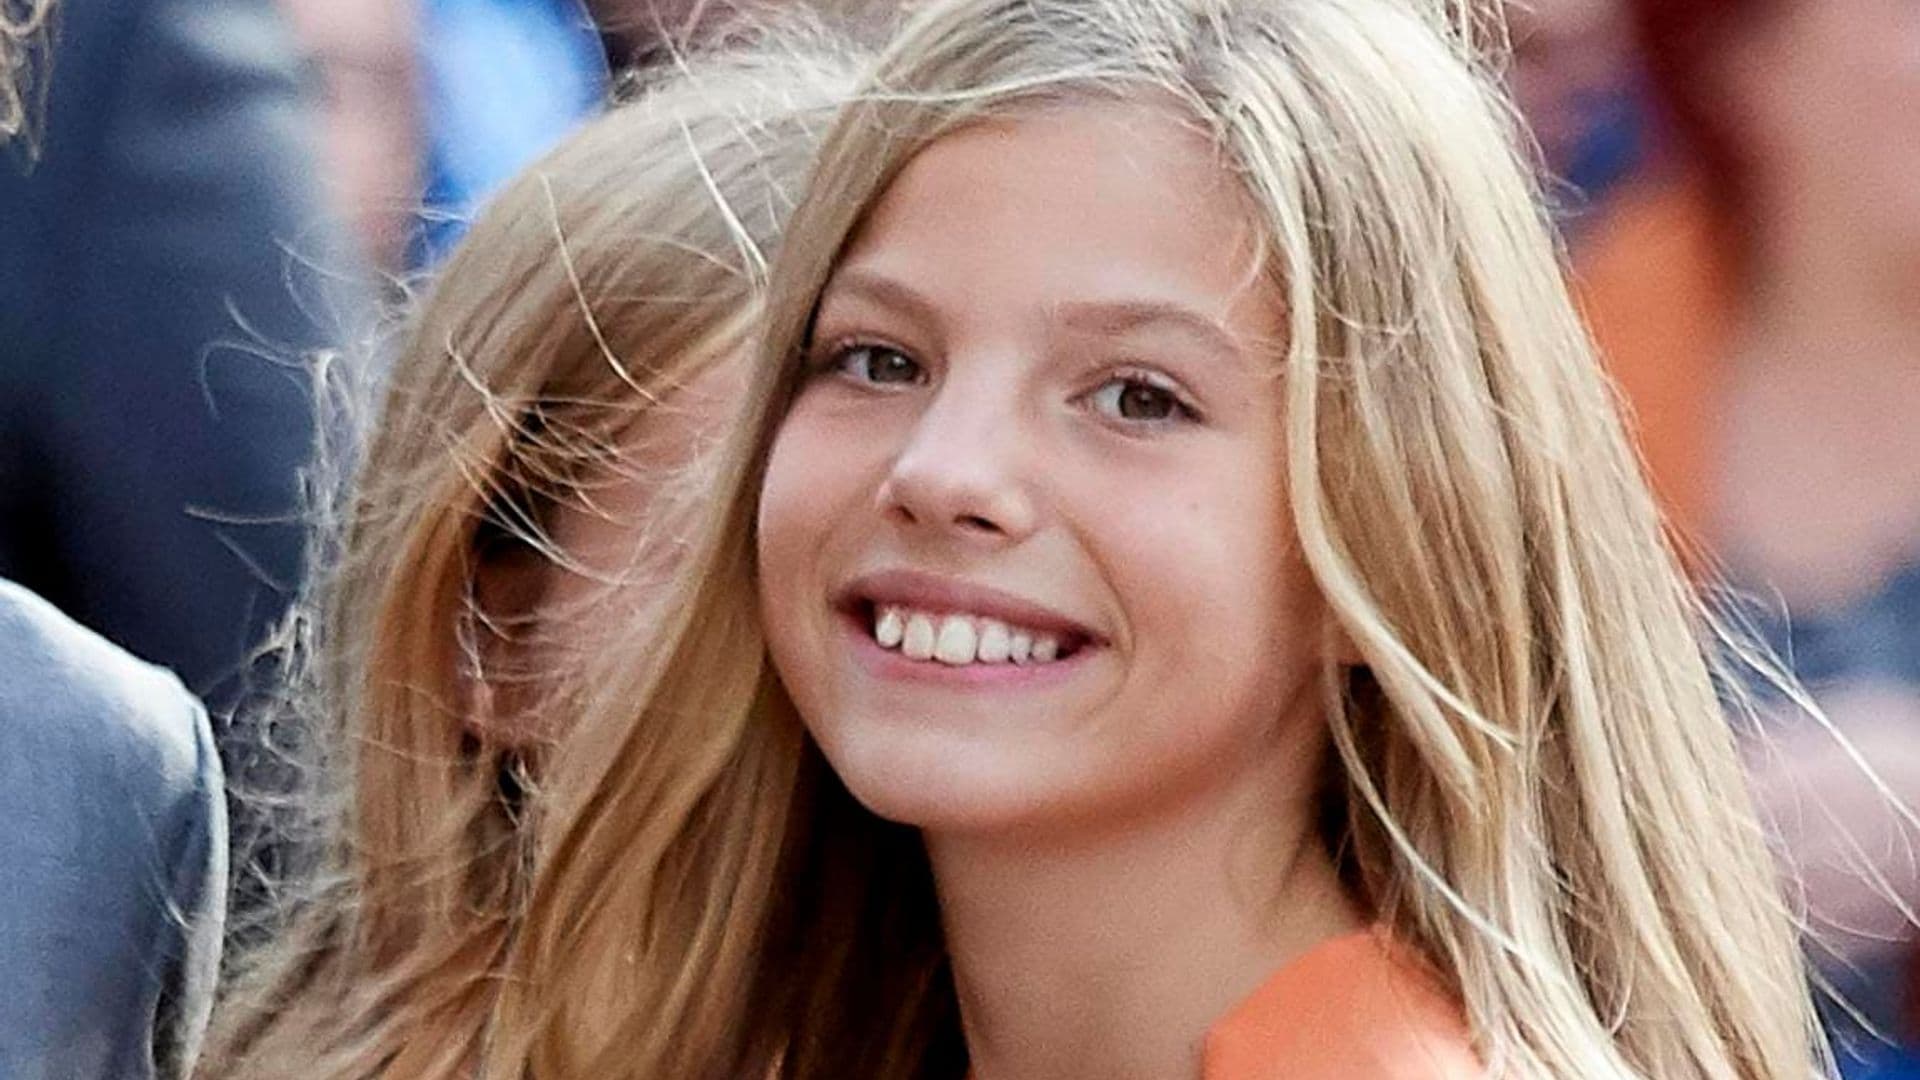 Queen Letizia’s daughter Princess Sofia’s journey to the teen years